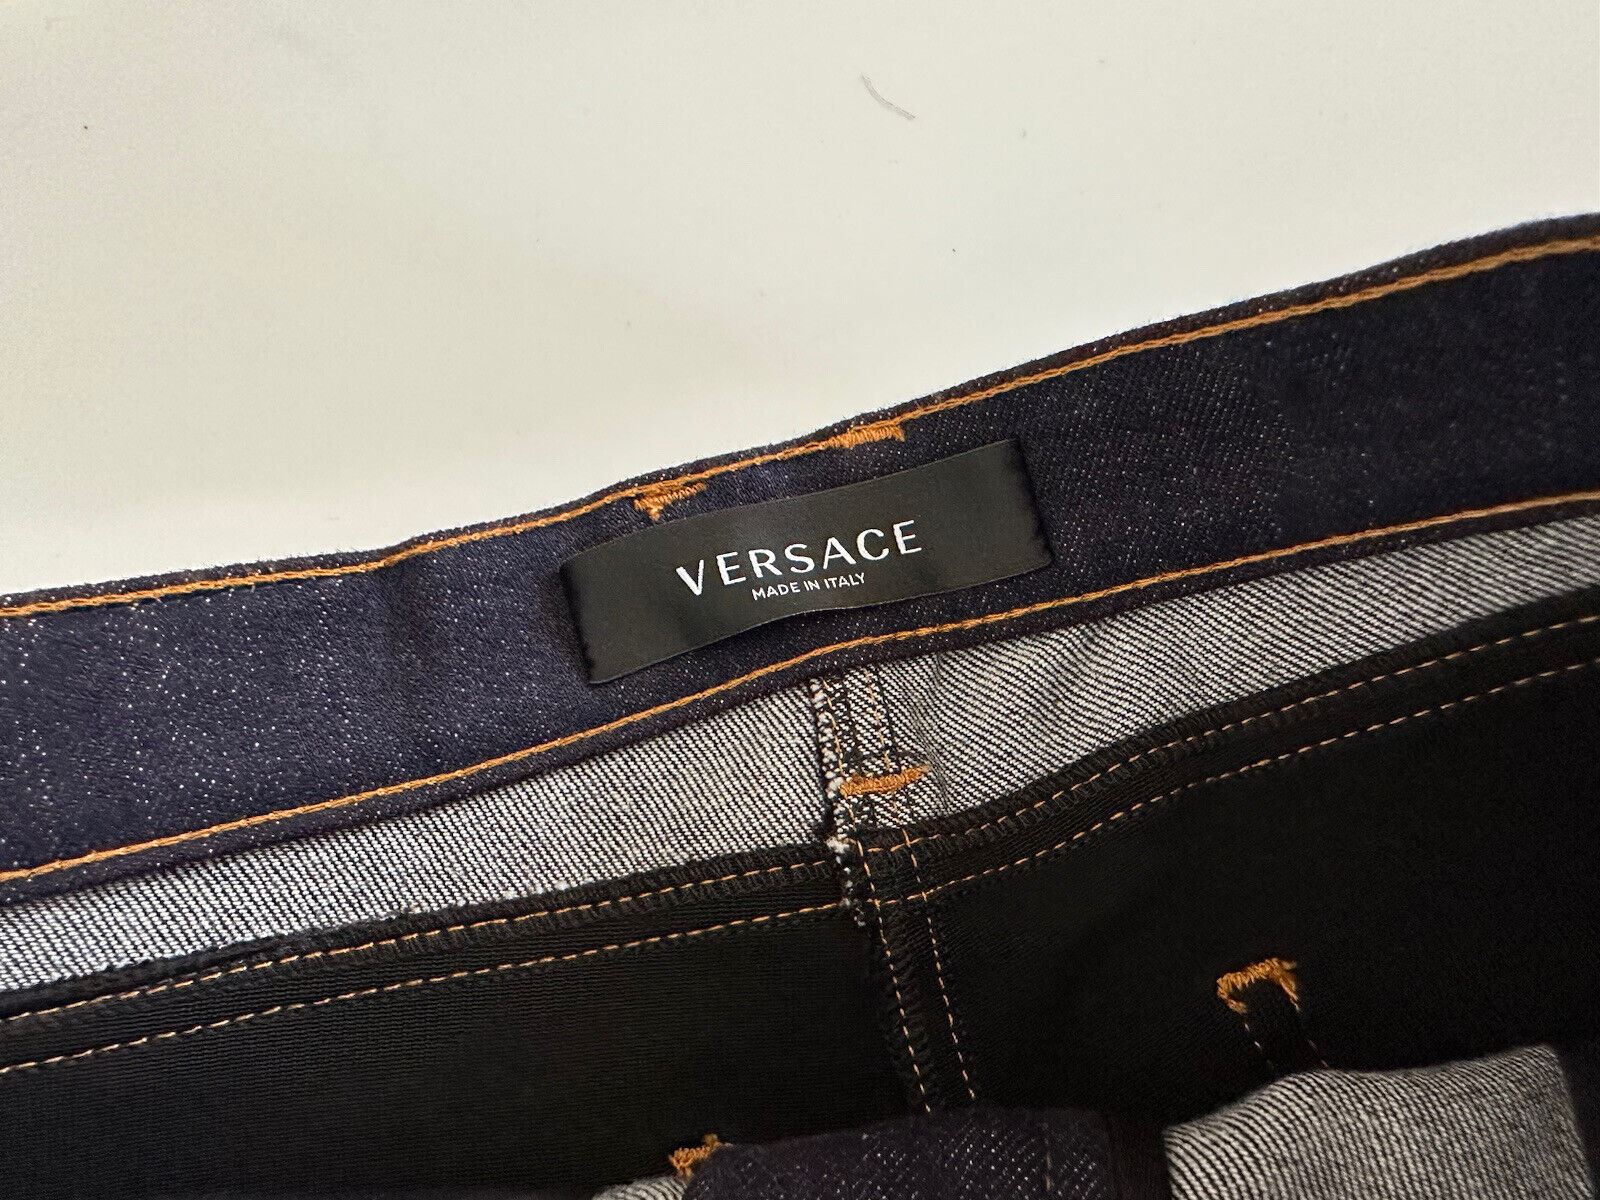 NWT $925 Versace Women's Denim Blue Jeans Size 27 US 1003998 Made in Italy